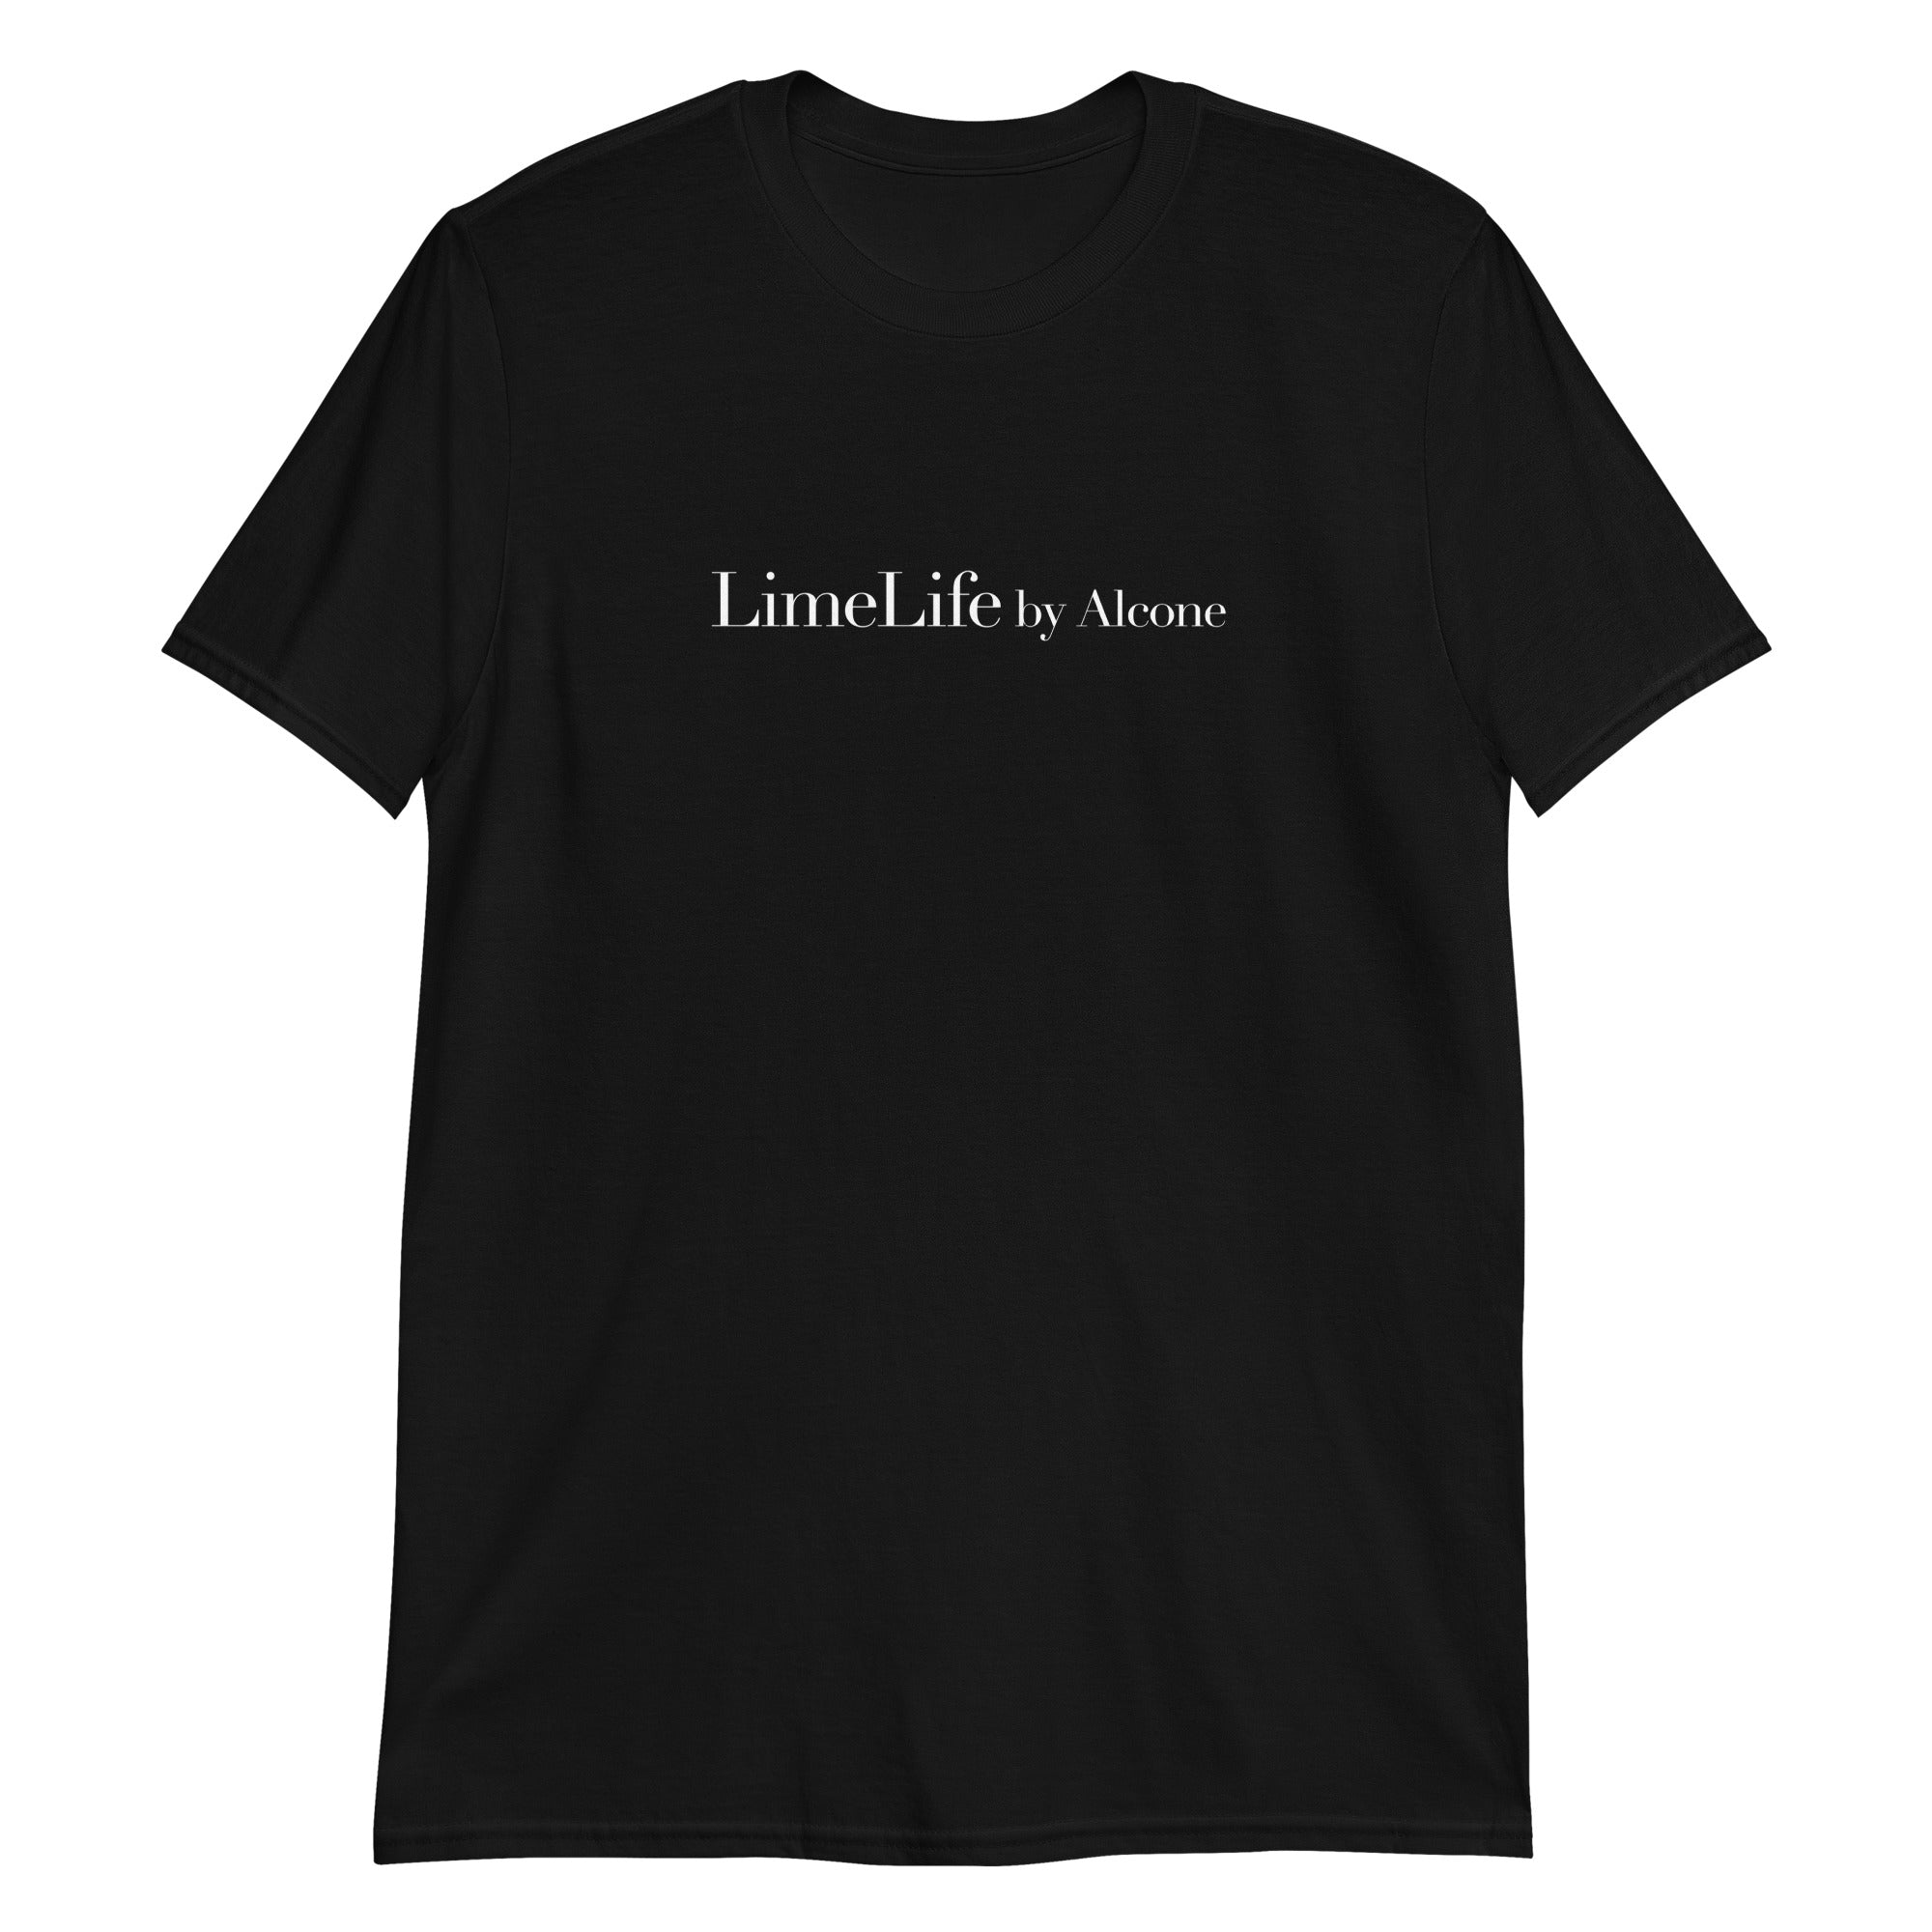 LimeLife by Alcone - Short-Sleeve Unisex T-Shirt